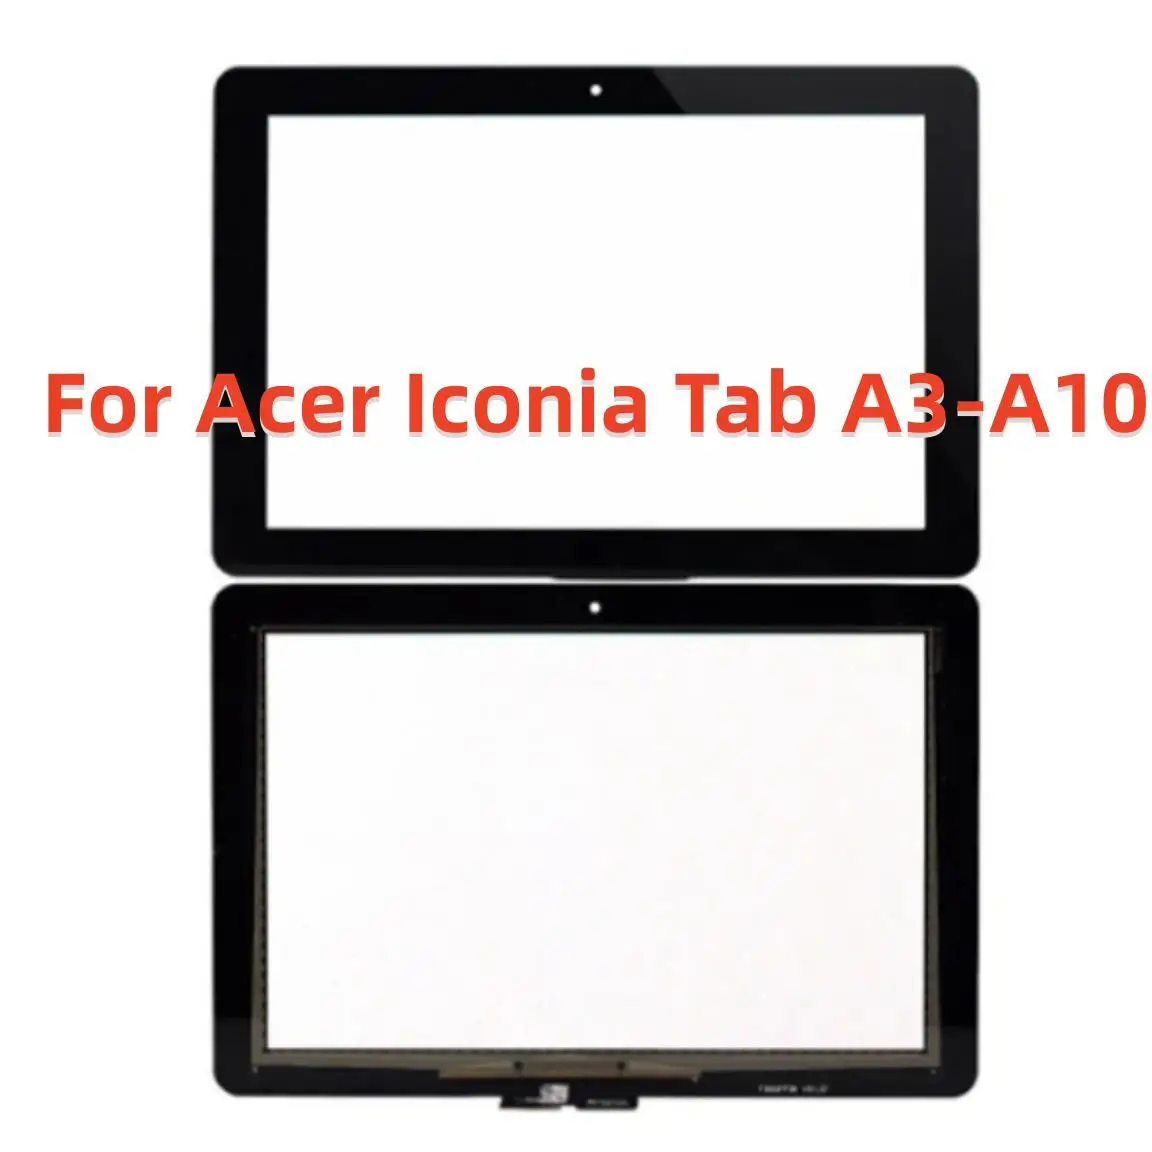 

New 10.1" Touch Screen For Acer Iconia Tab A3-A10 A3-A11 A3 A10 A11 Touch Panel Digitizer Glass Lens Sensor Replacement Parts